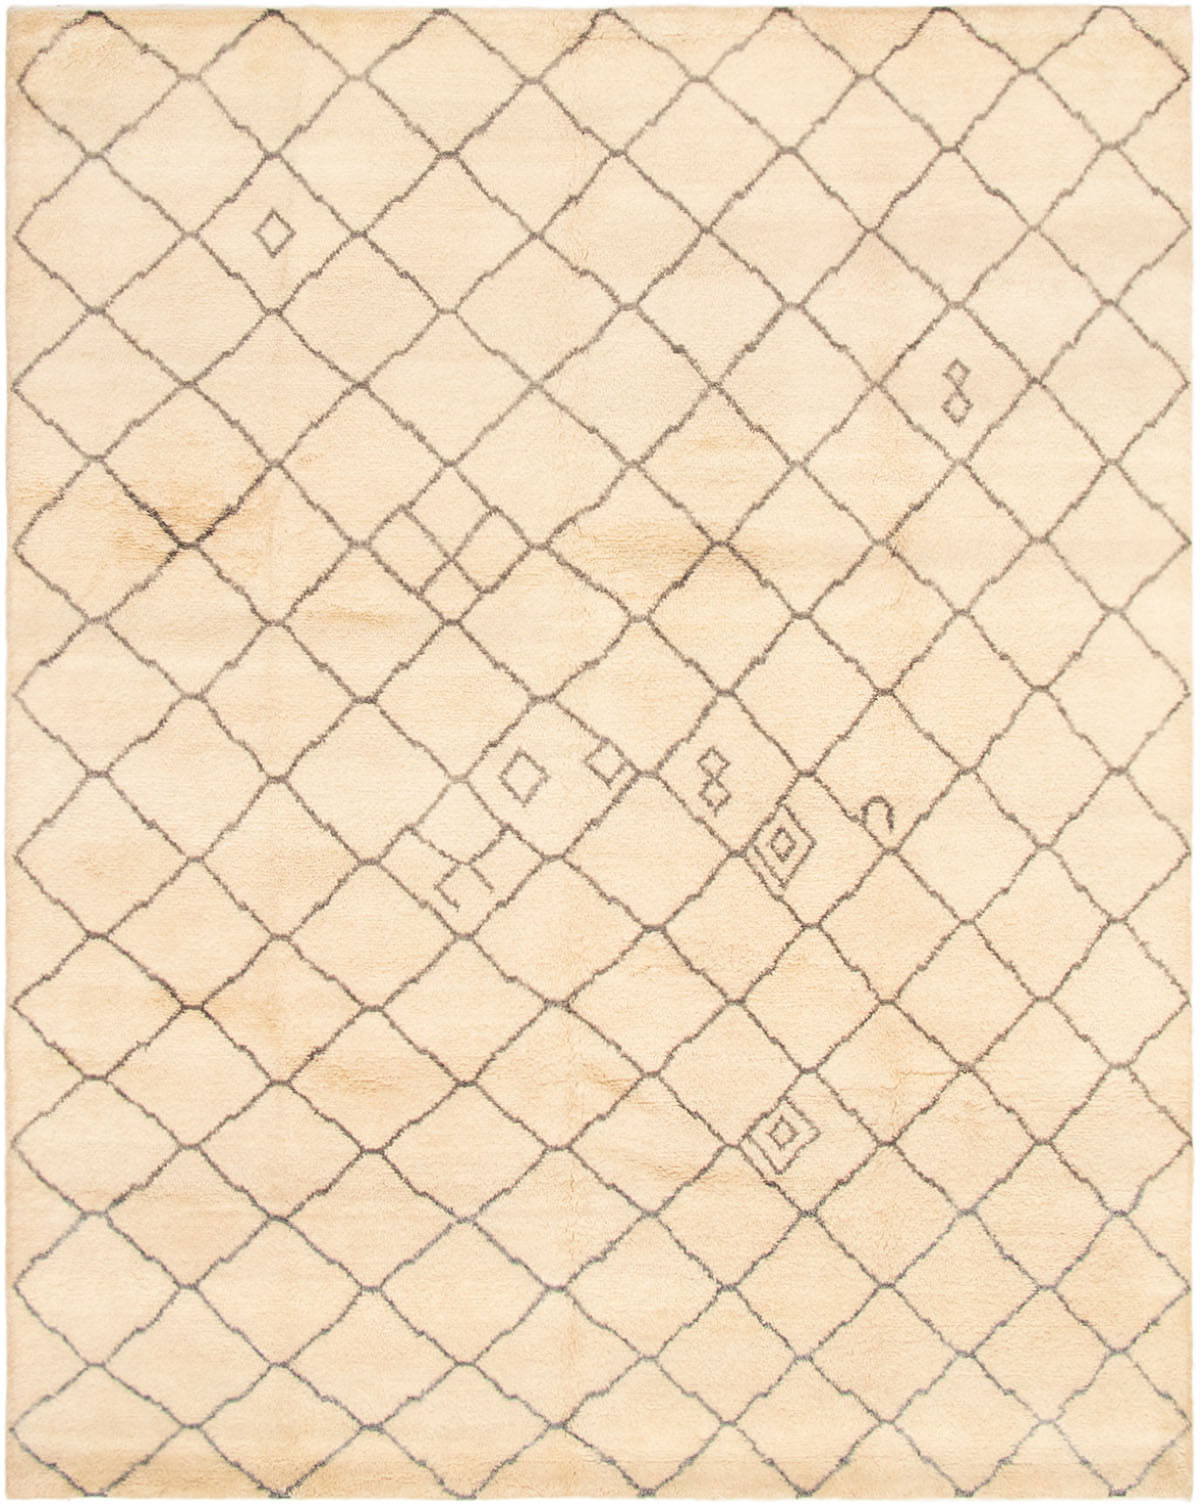 Hand-knotted Arlequin Cream Wool Rug 8'0" x 10'2" Size: 8'0" x 10'2"  